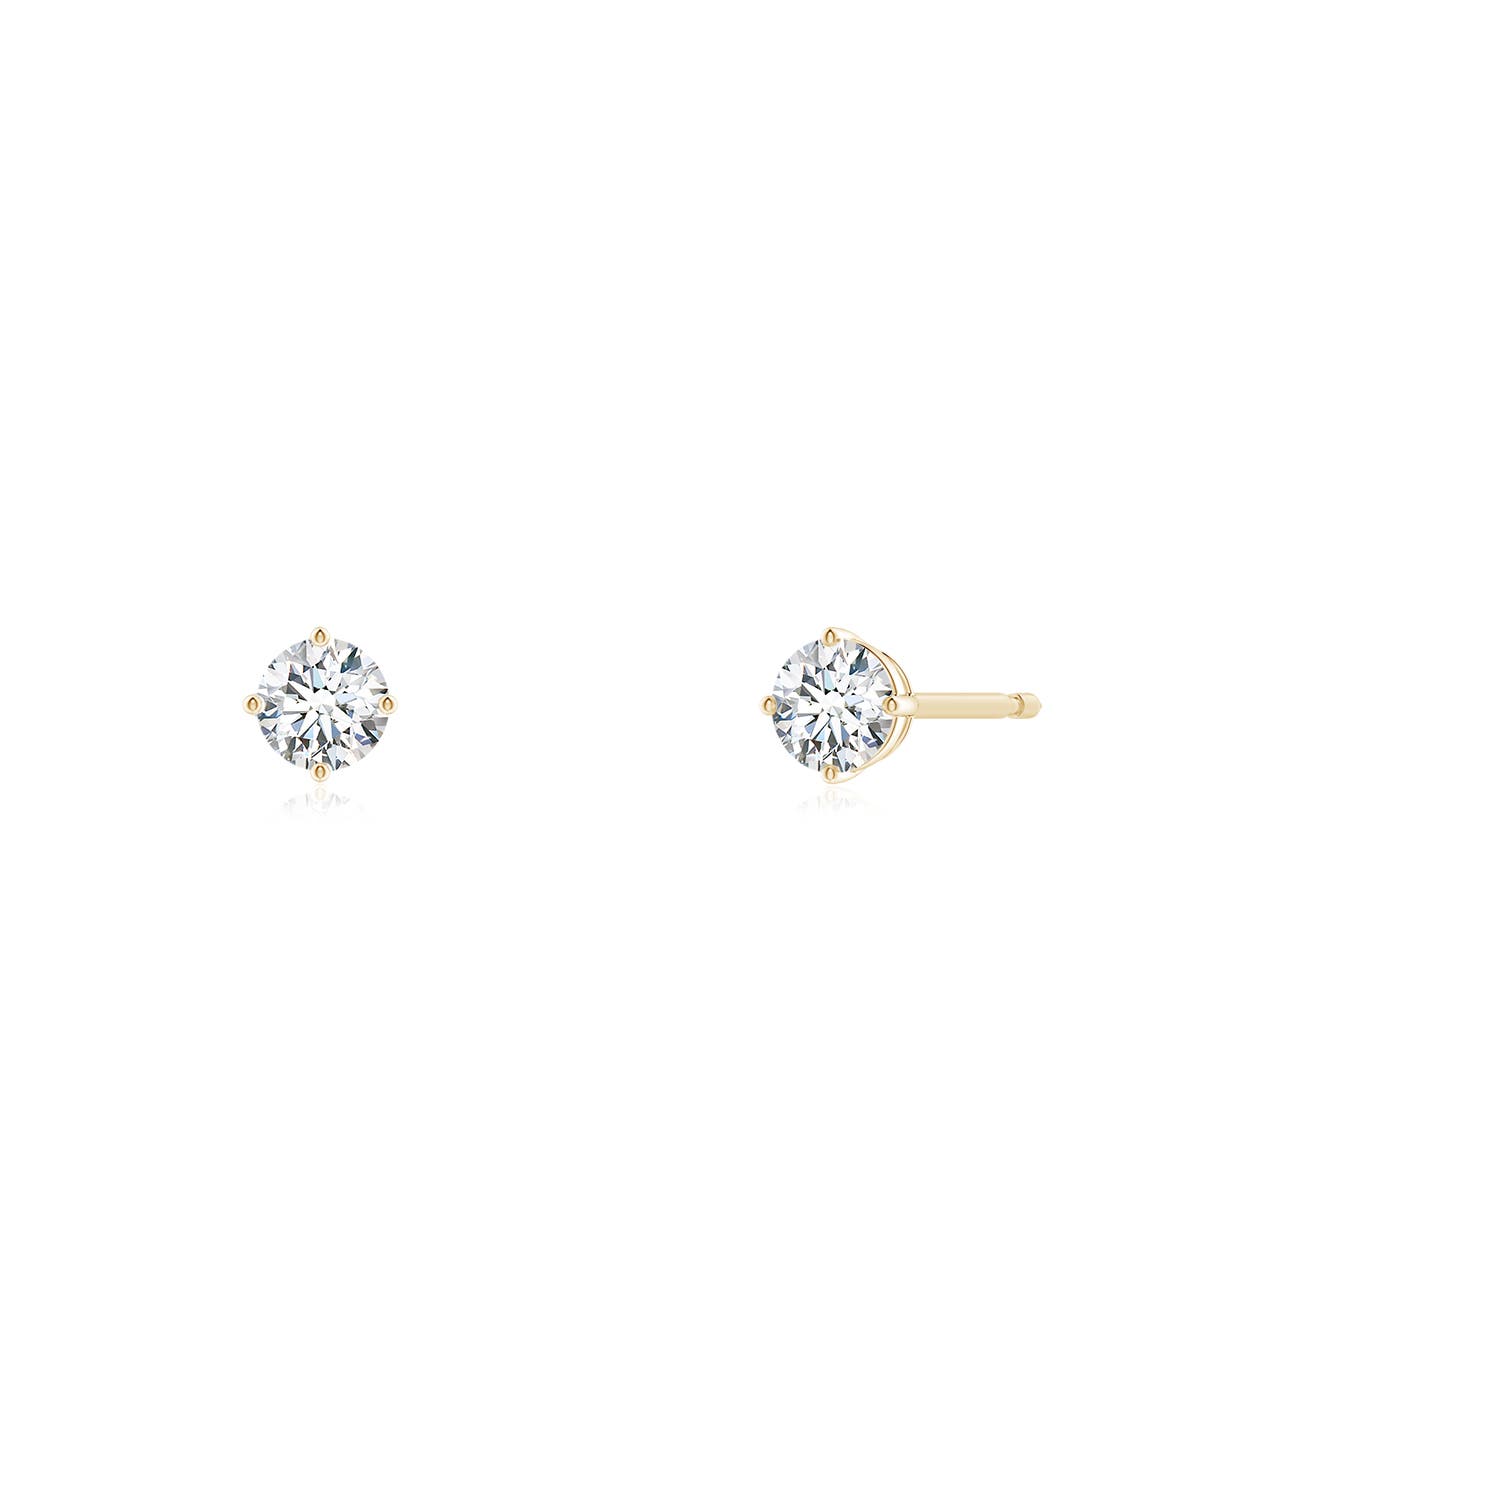 GVS2 / 0.21 CT / 14 KT Yellow Gold